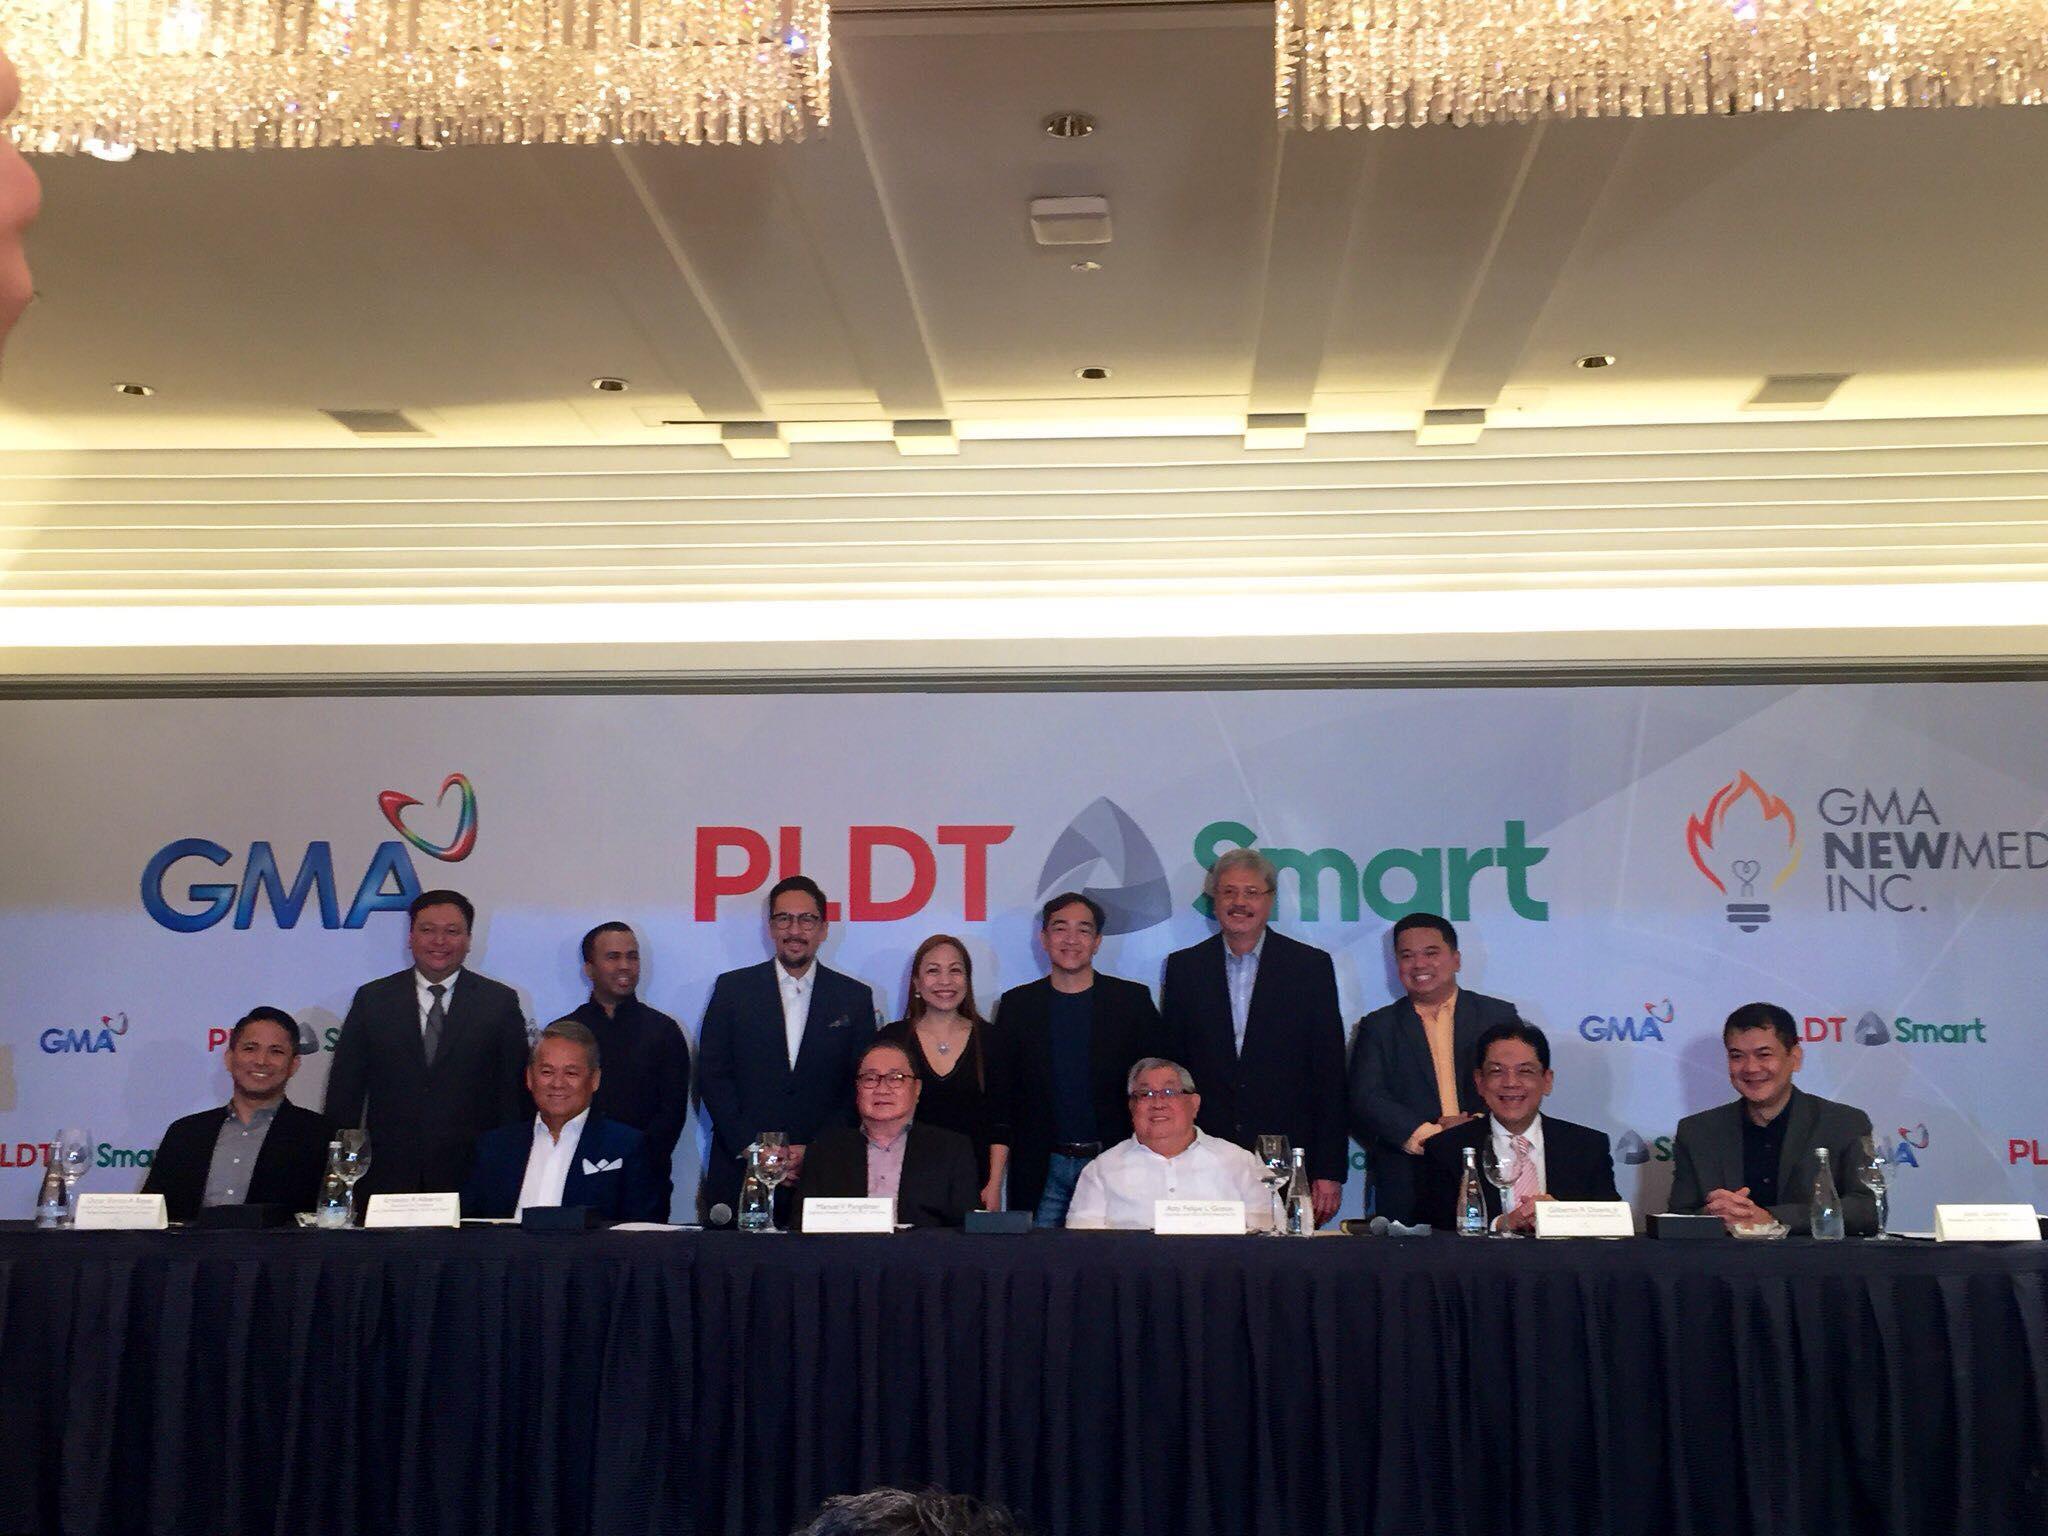 GMA Network Inc./GMA New Media Inc. (NMI) and PLDT-Smart Communications Inc. on Wednesday laid the groundwork of a formidable partnership to revolutionize TV-viewing experience in the country.